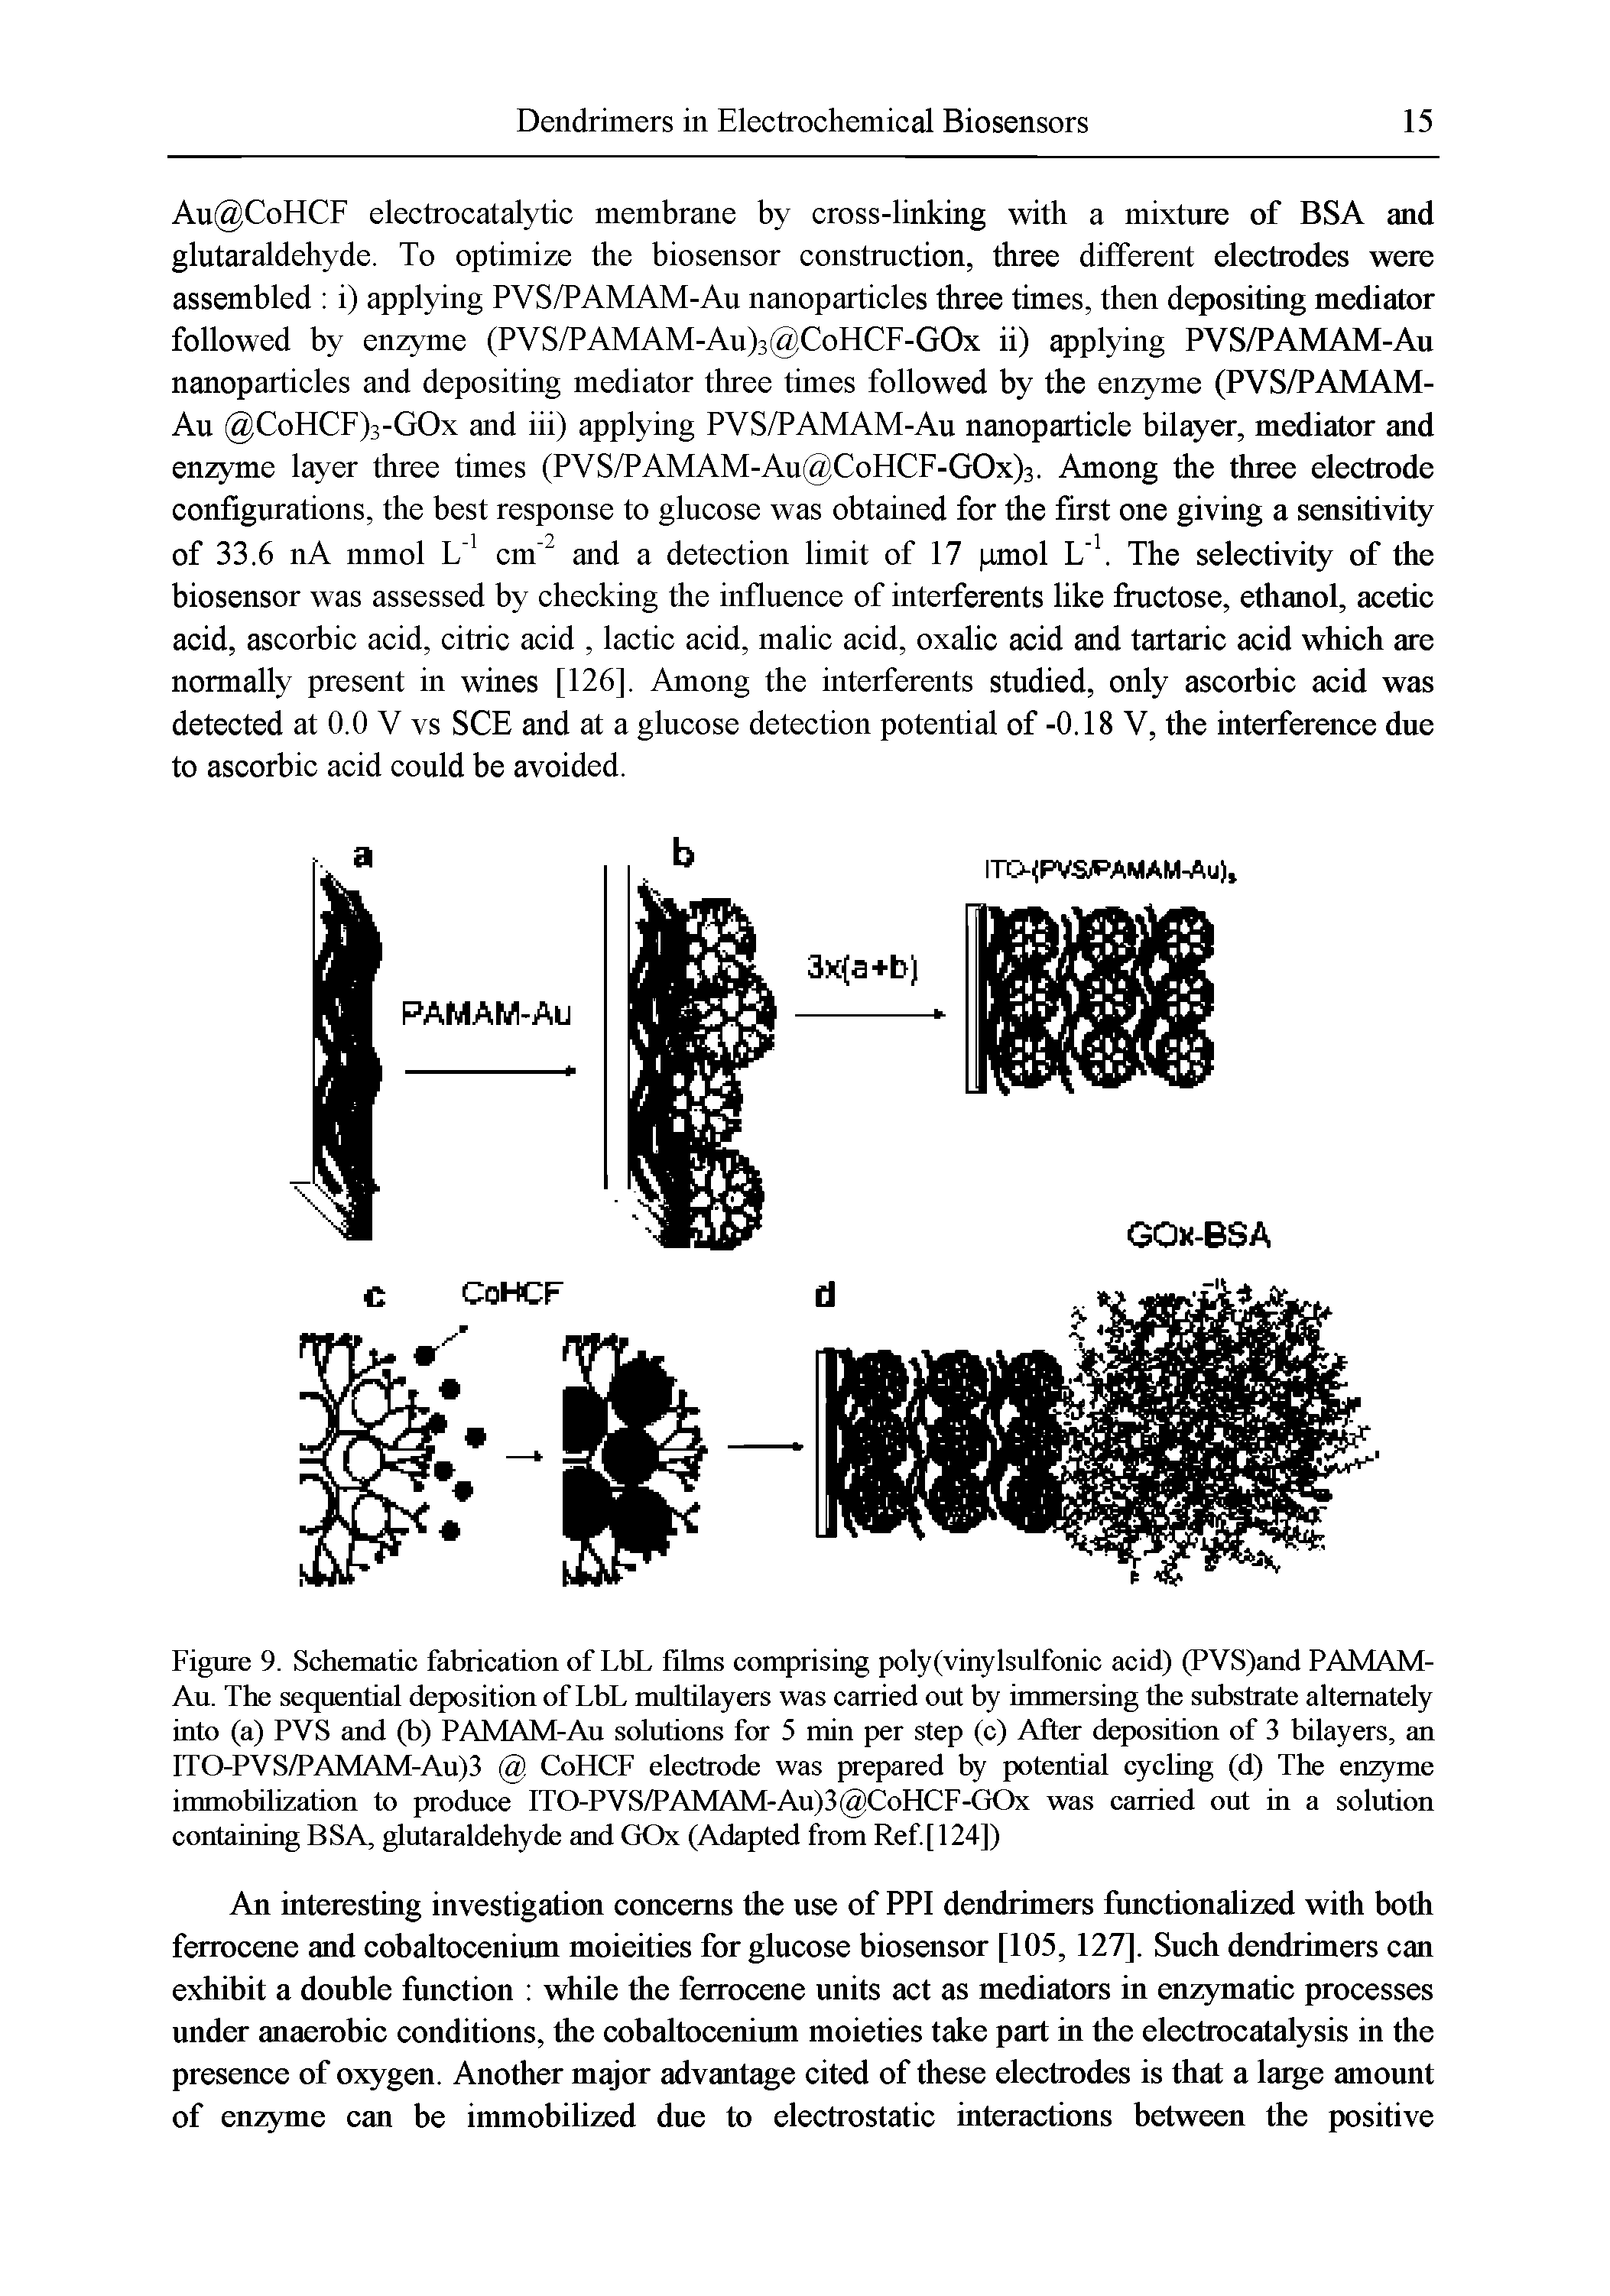 Figure 9. Schematic fabrication of LbL films comprising poly(vinylsulfonic acid) (PVS)and PAMAM-Au. The sequential deposition of LbL multilayers was carried out by immersing the substrate alternately into (a) PVS and (b) PAMAM-Au solutions for 5 min per step (c) After deposition of 3 bilayers, an ITO-PVS/PAMAM-Au)3 CoHCF electrode was prepared by potential cycling (d) The enzyme immobilization to produce ITO-PVS/PAMAM-Au)3 CoHCF-GOx was carried out in a solution containing BSA, glutaraldehyde and GOx (Adapted from Ref.[124])...